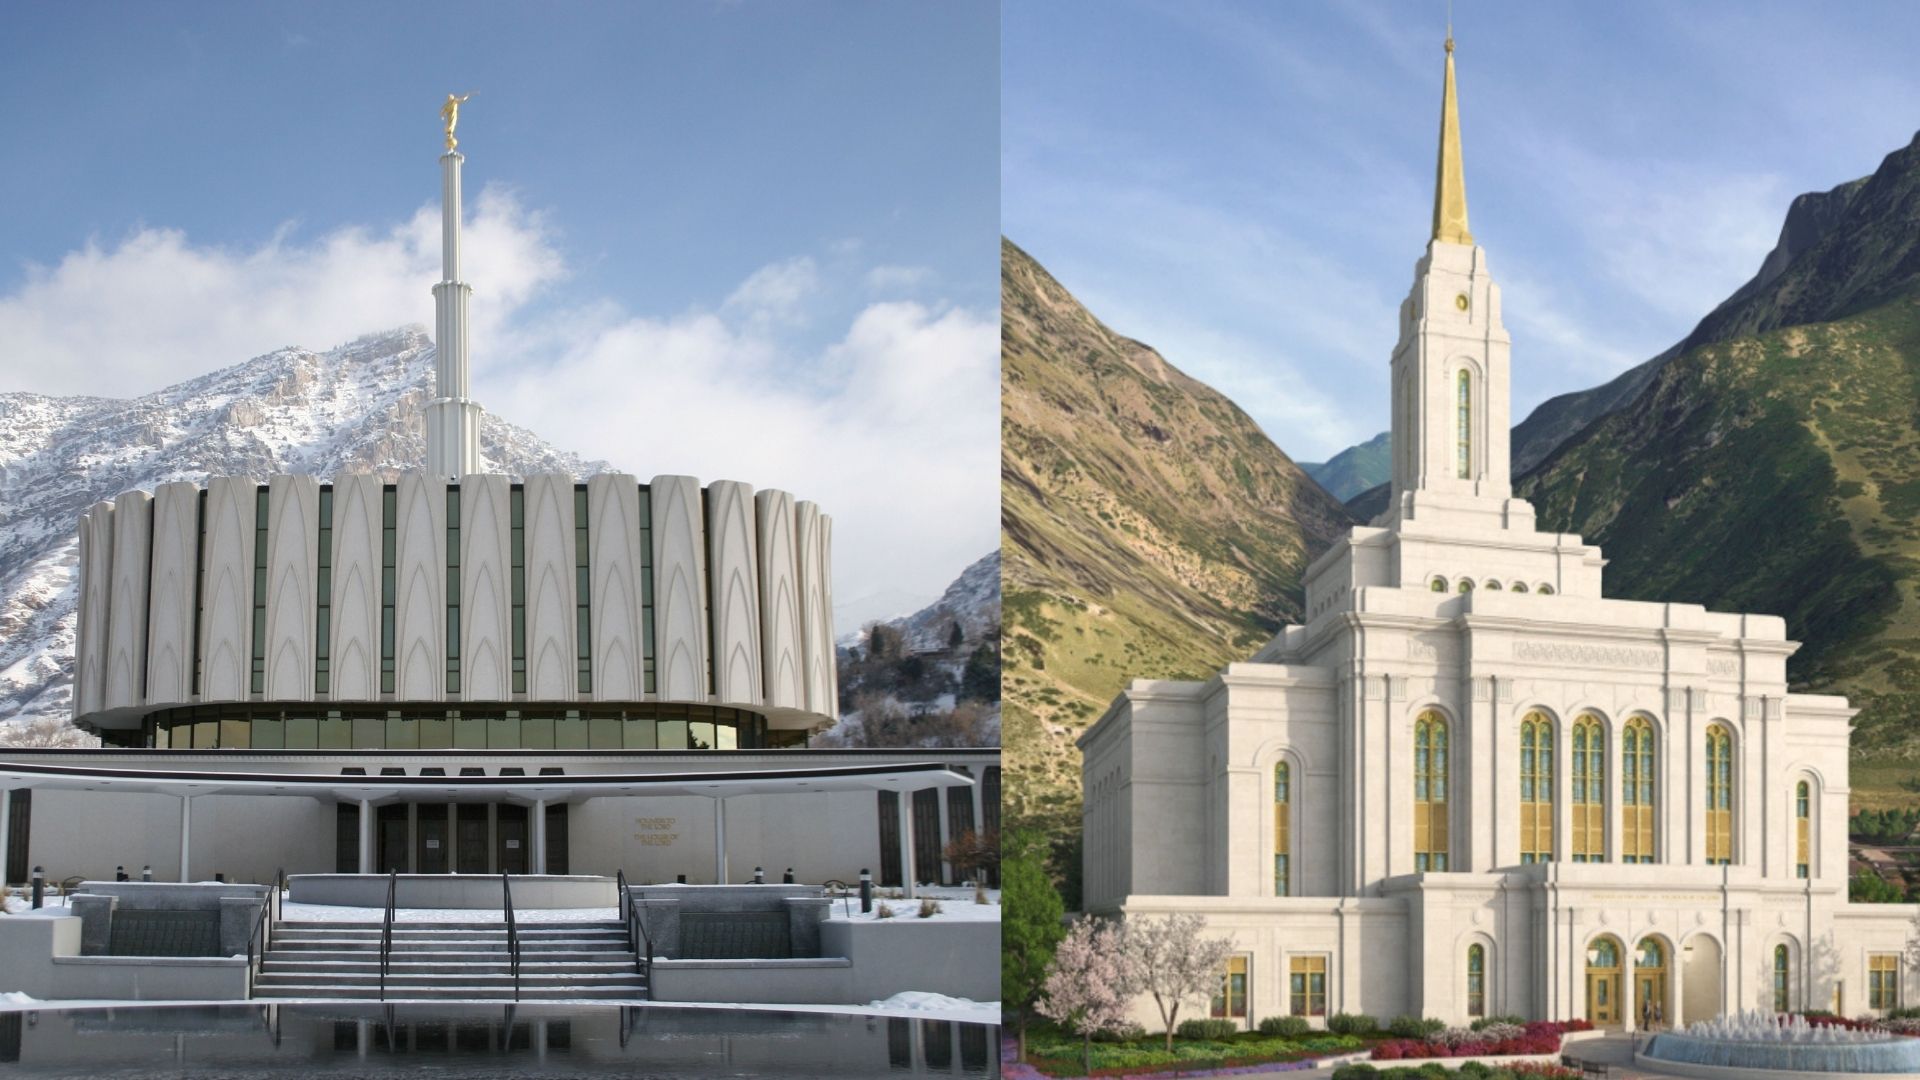 Church to completely redesign iconic Provo Temple